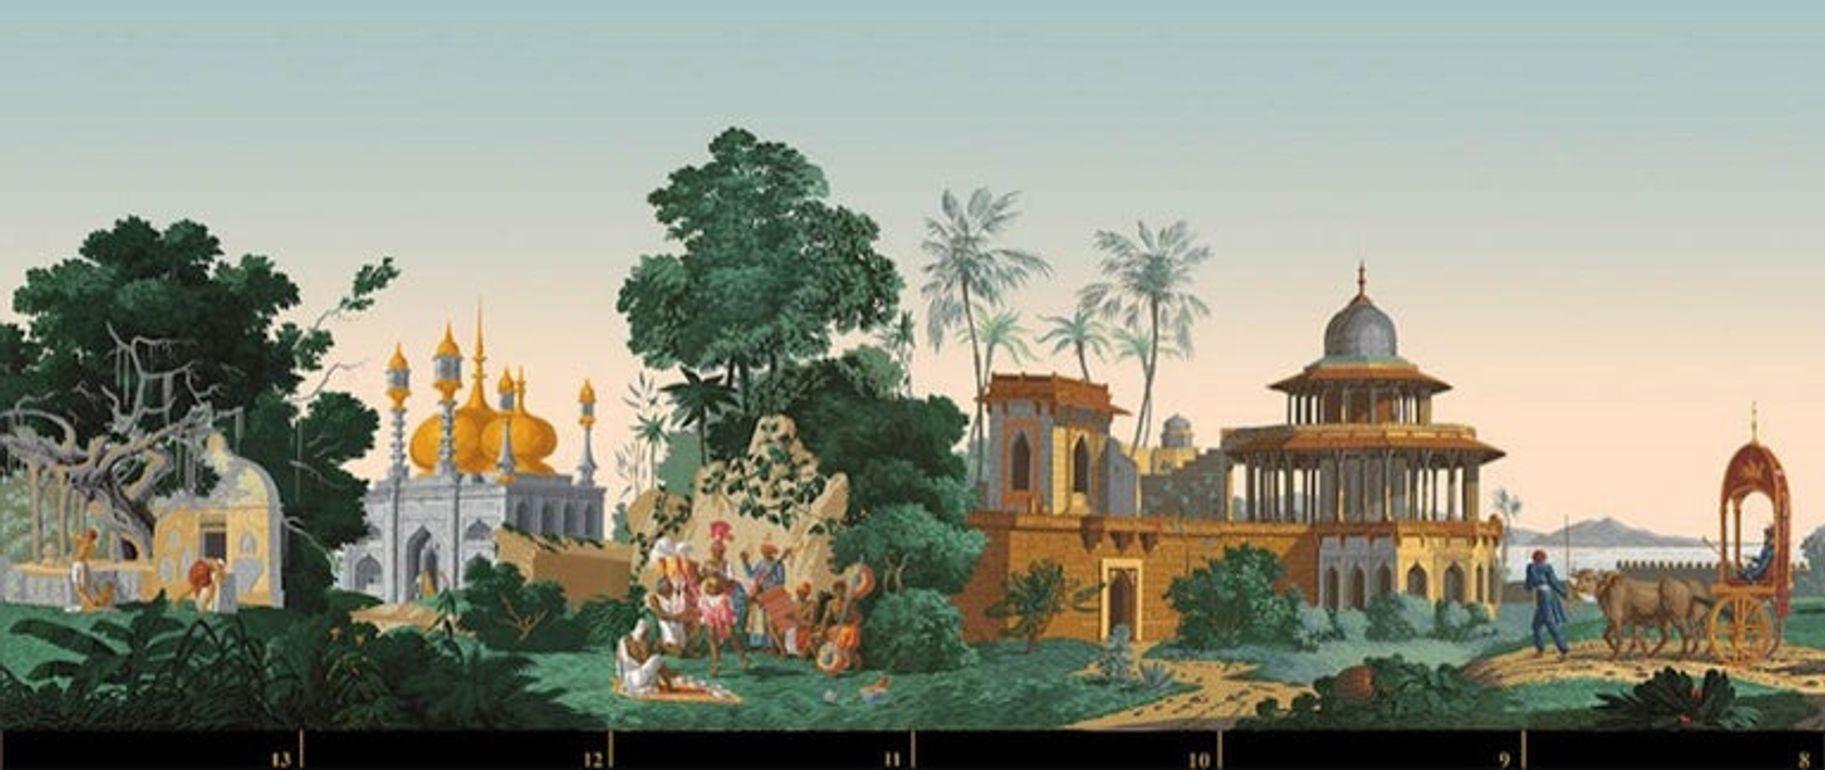 The Hindustan Panoramic Wallpaper Panels by Zuber & Cie. Rixhem, France For Sale 9